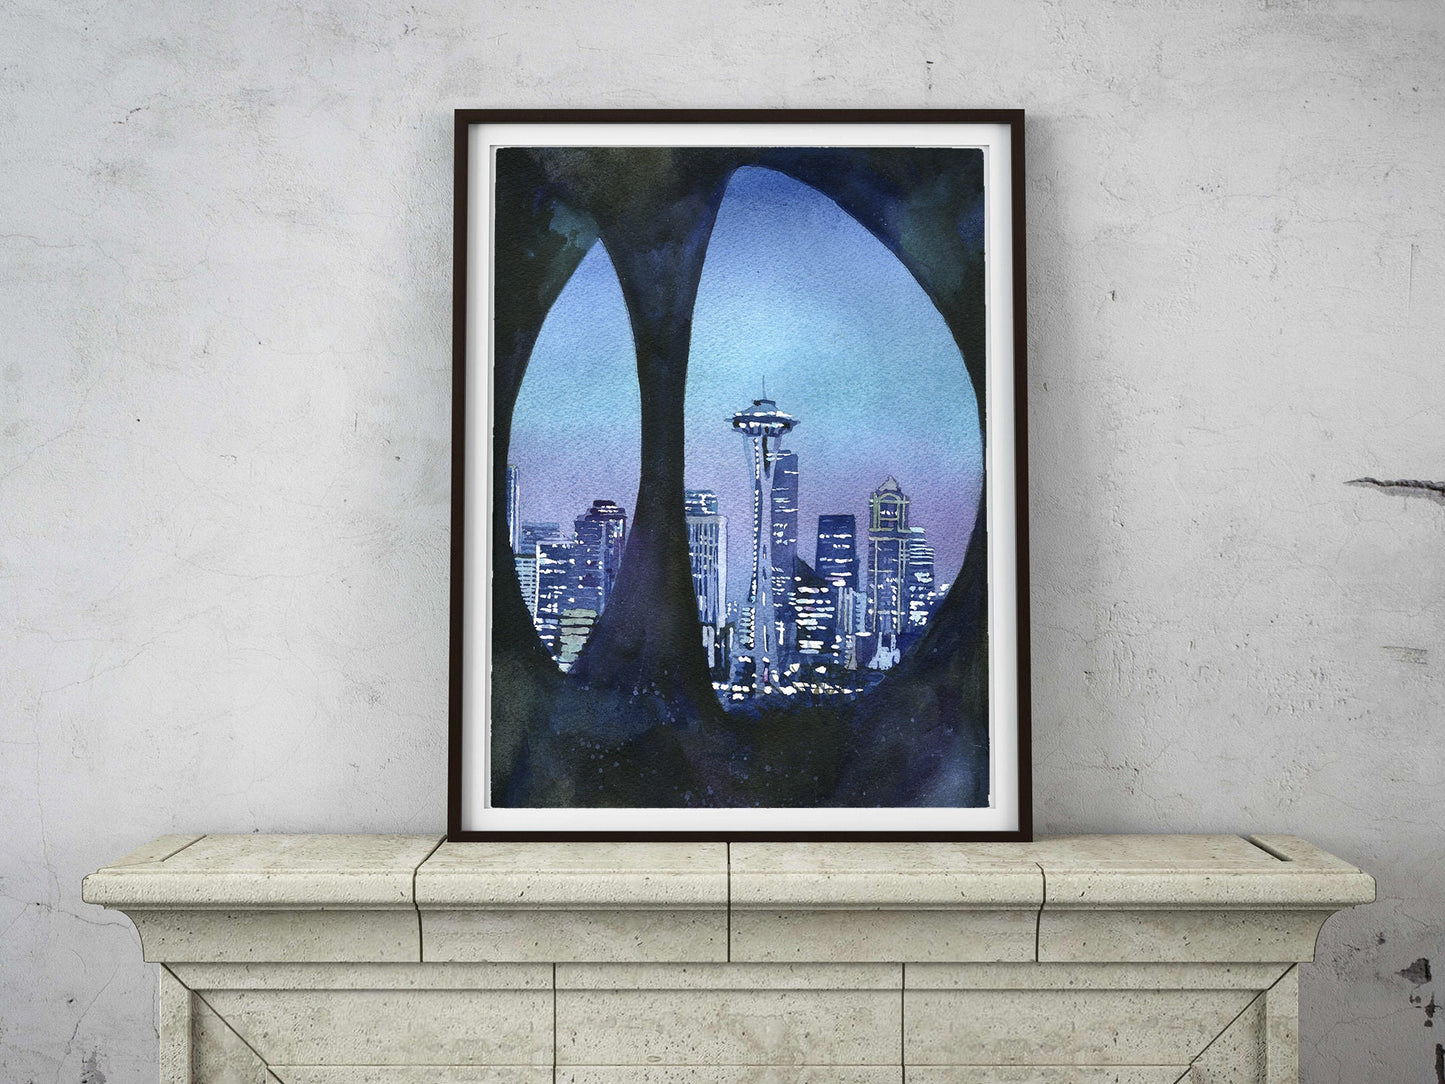 Seattle, WA skyline with Space Needle as viewed through sculpture on Queen Ann Hill. Seattle art skyline painting watercolor blue